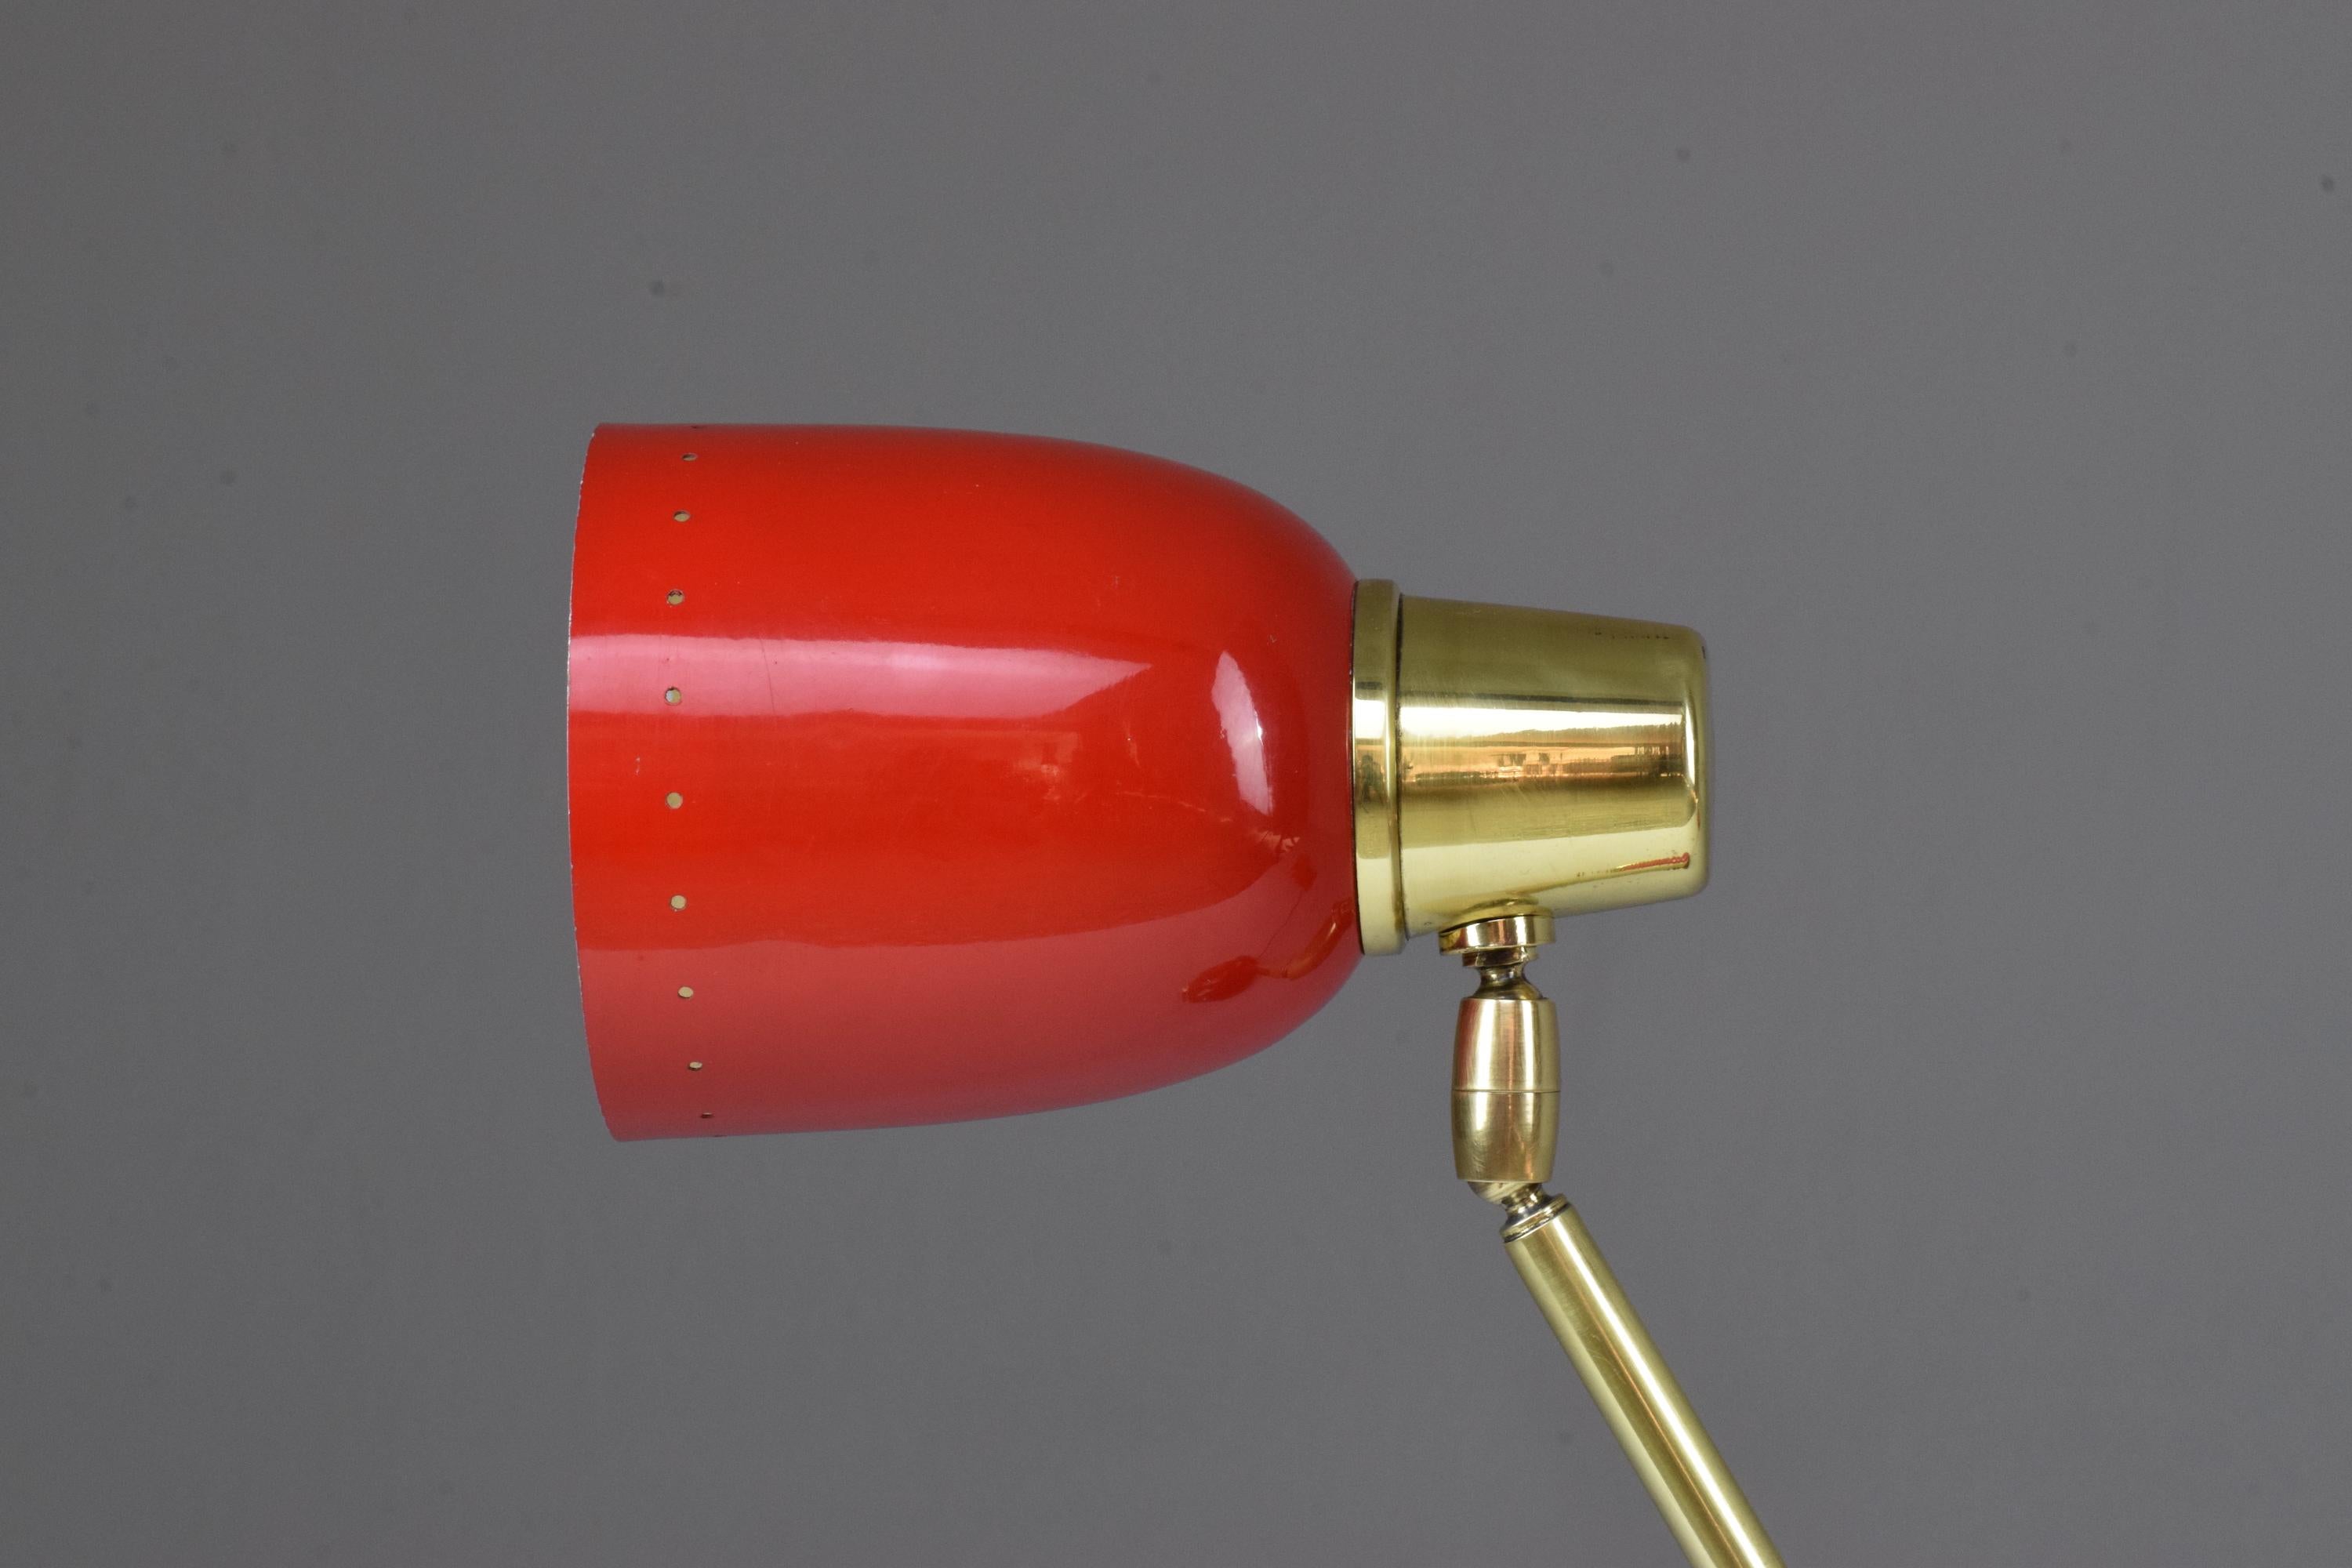 Brass Italian Midcentury Table Lamp in the style of Stilnovo, 1950s For Sale